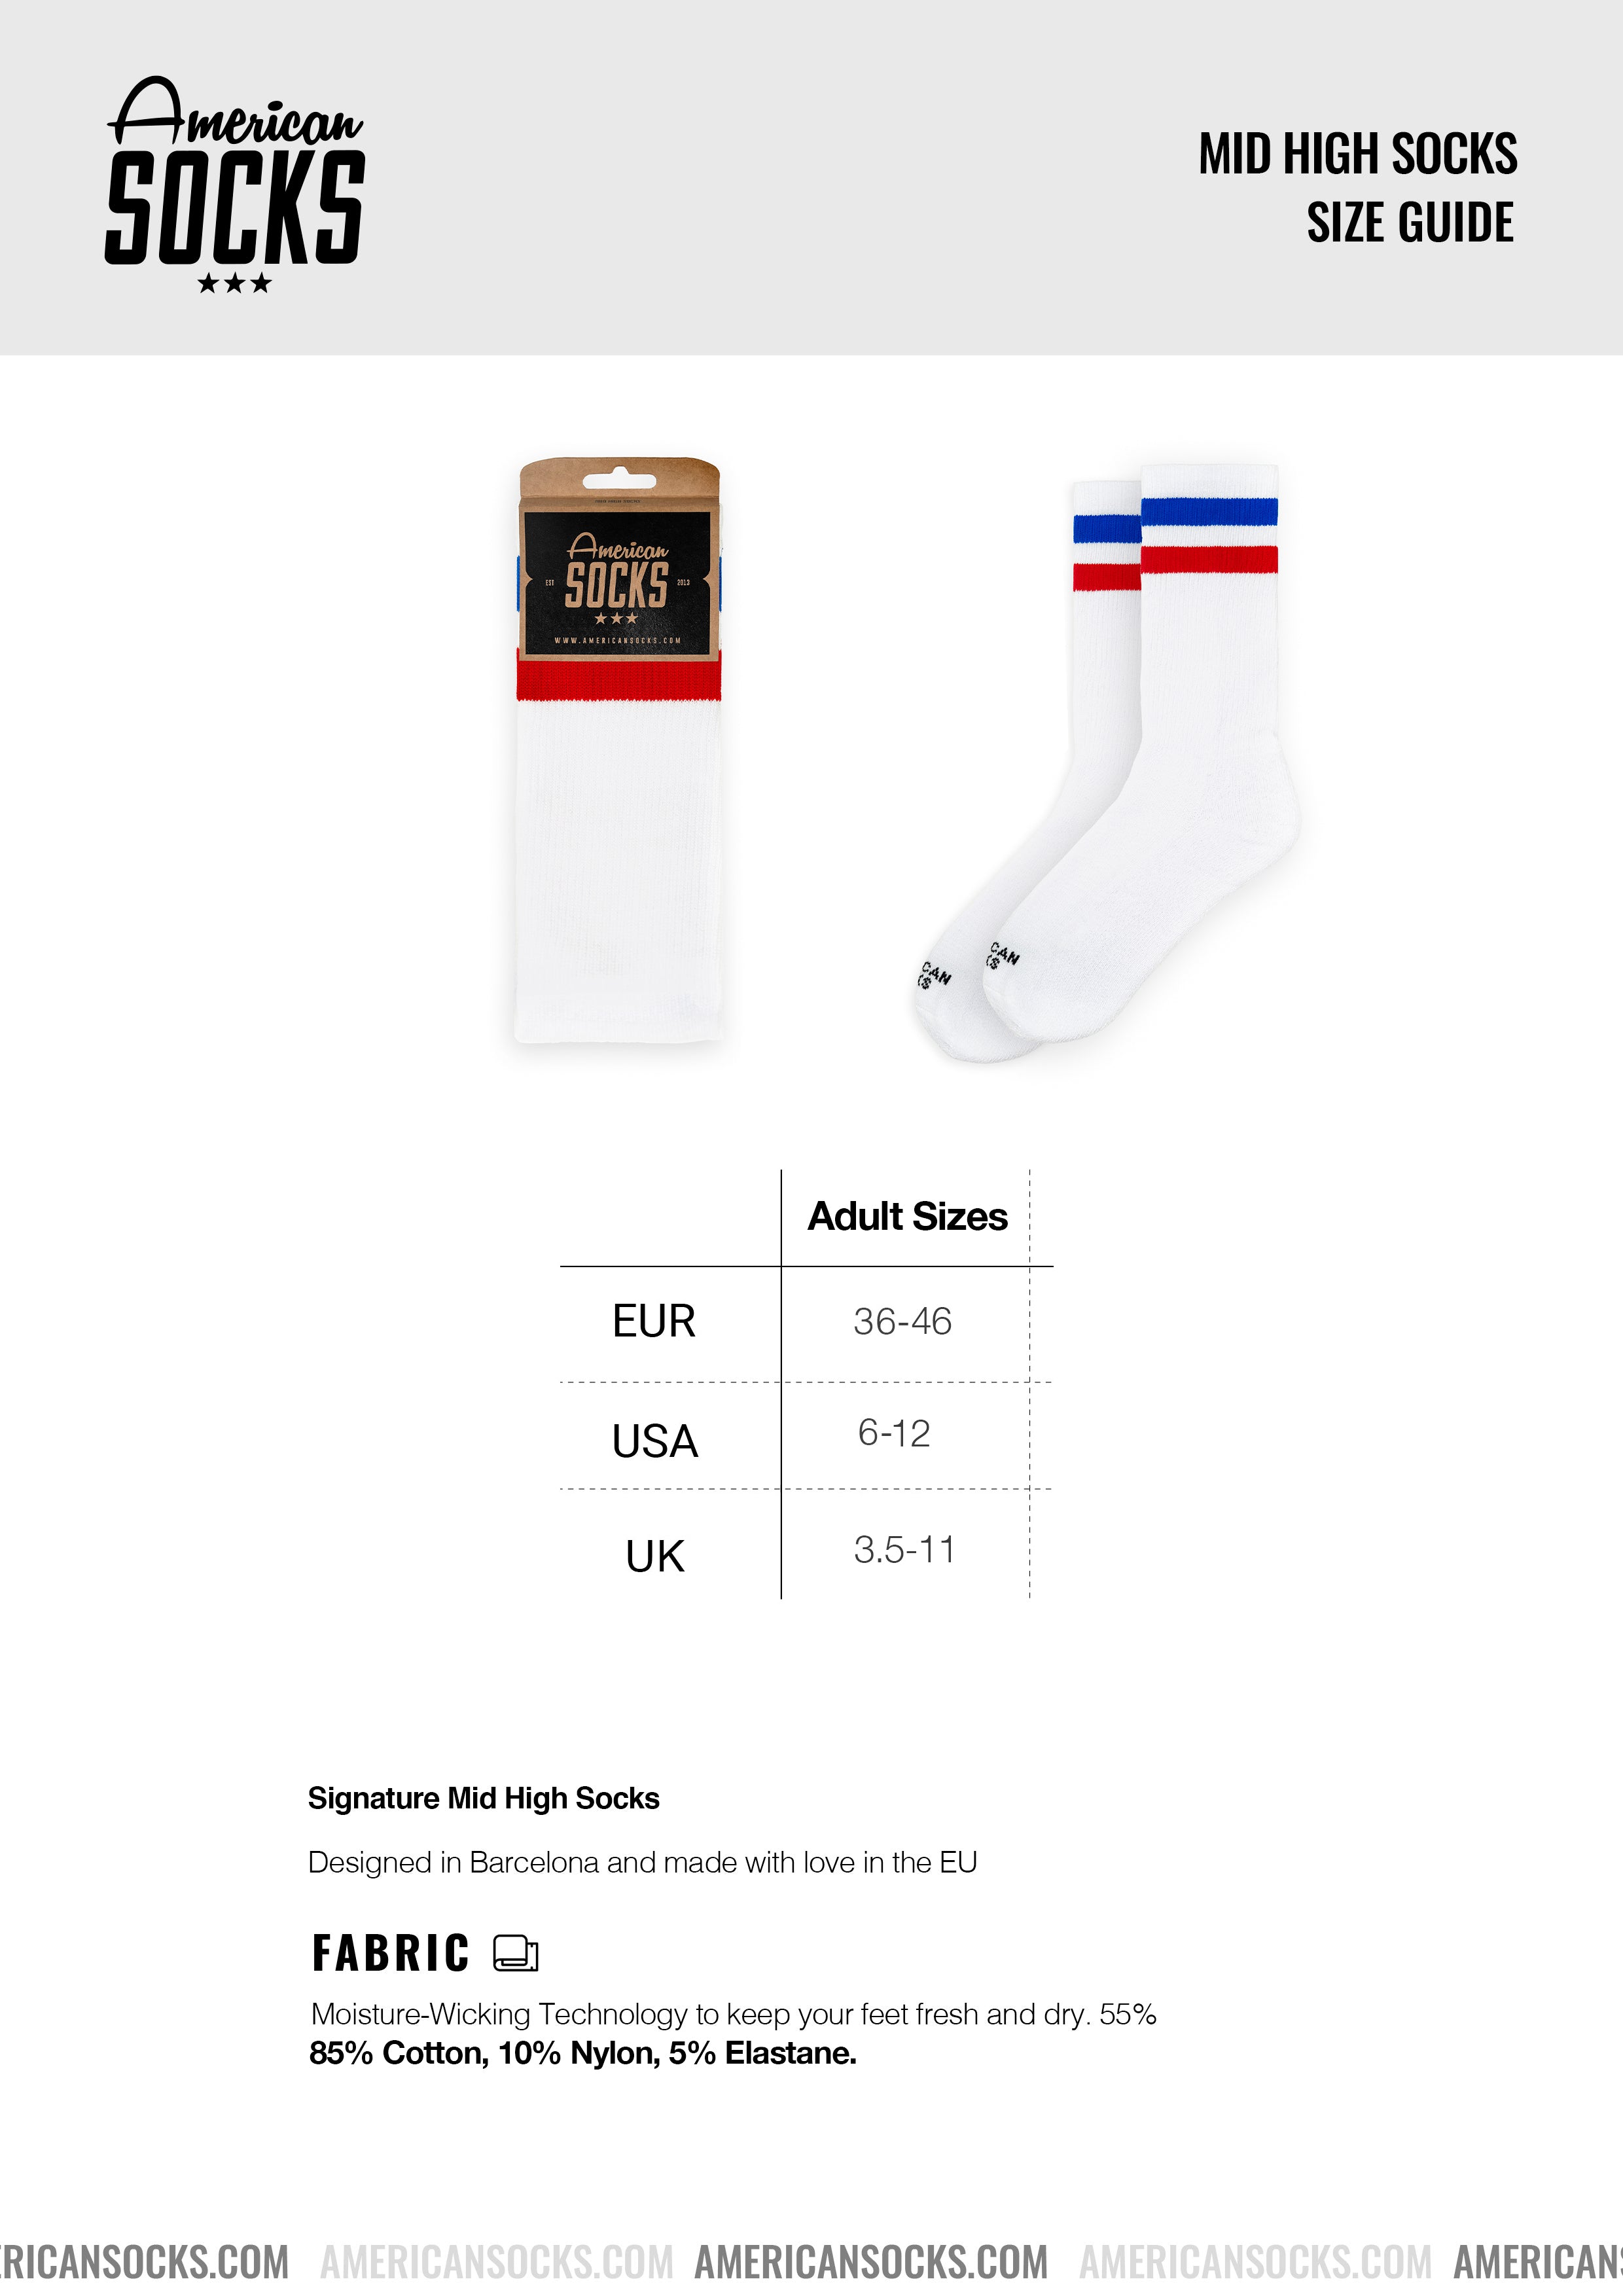 AMERICAN SOCKS MID HIGH RIP YOUR OPINION AS208 [2PUMW093] - 10,76